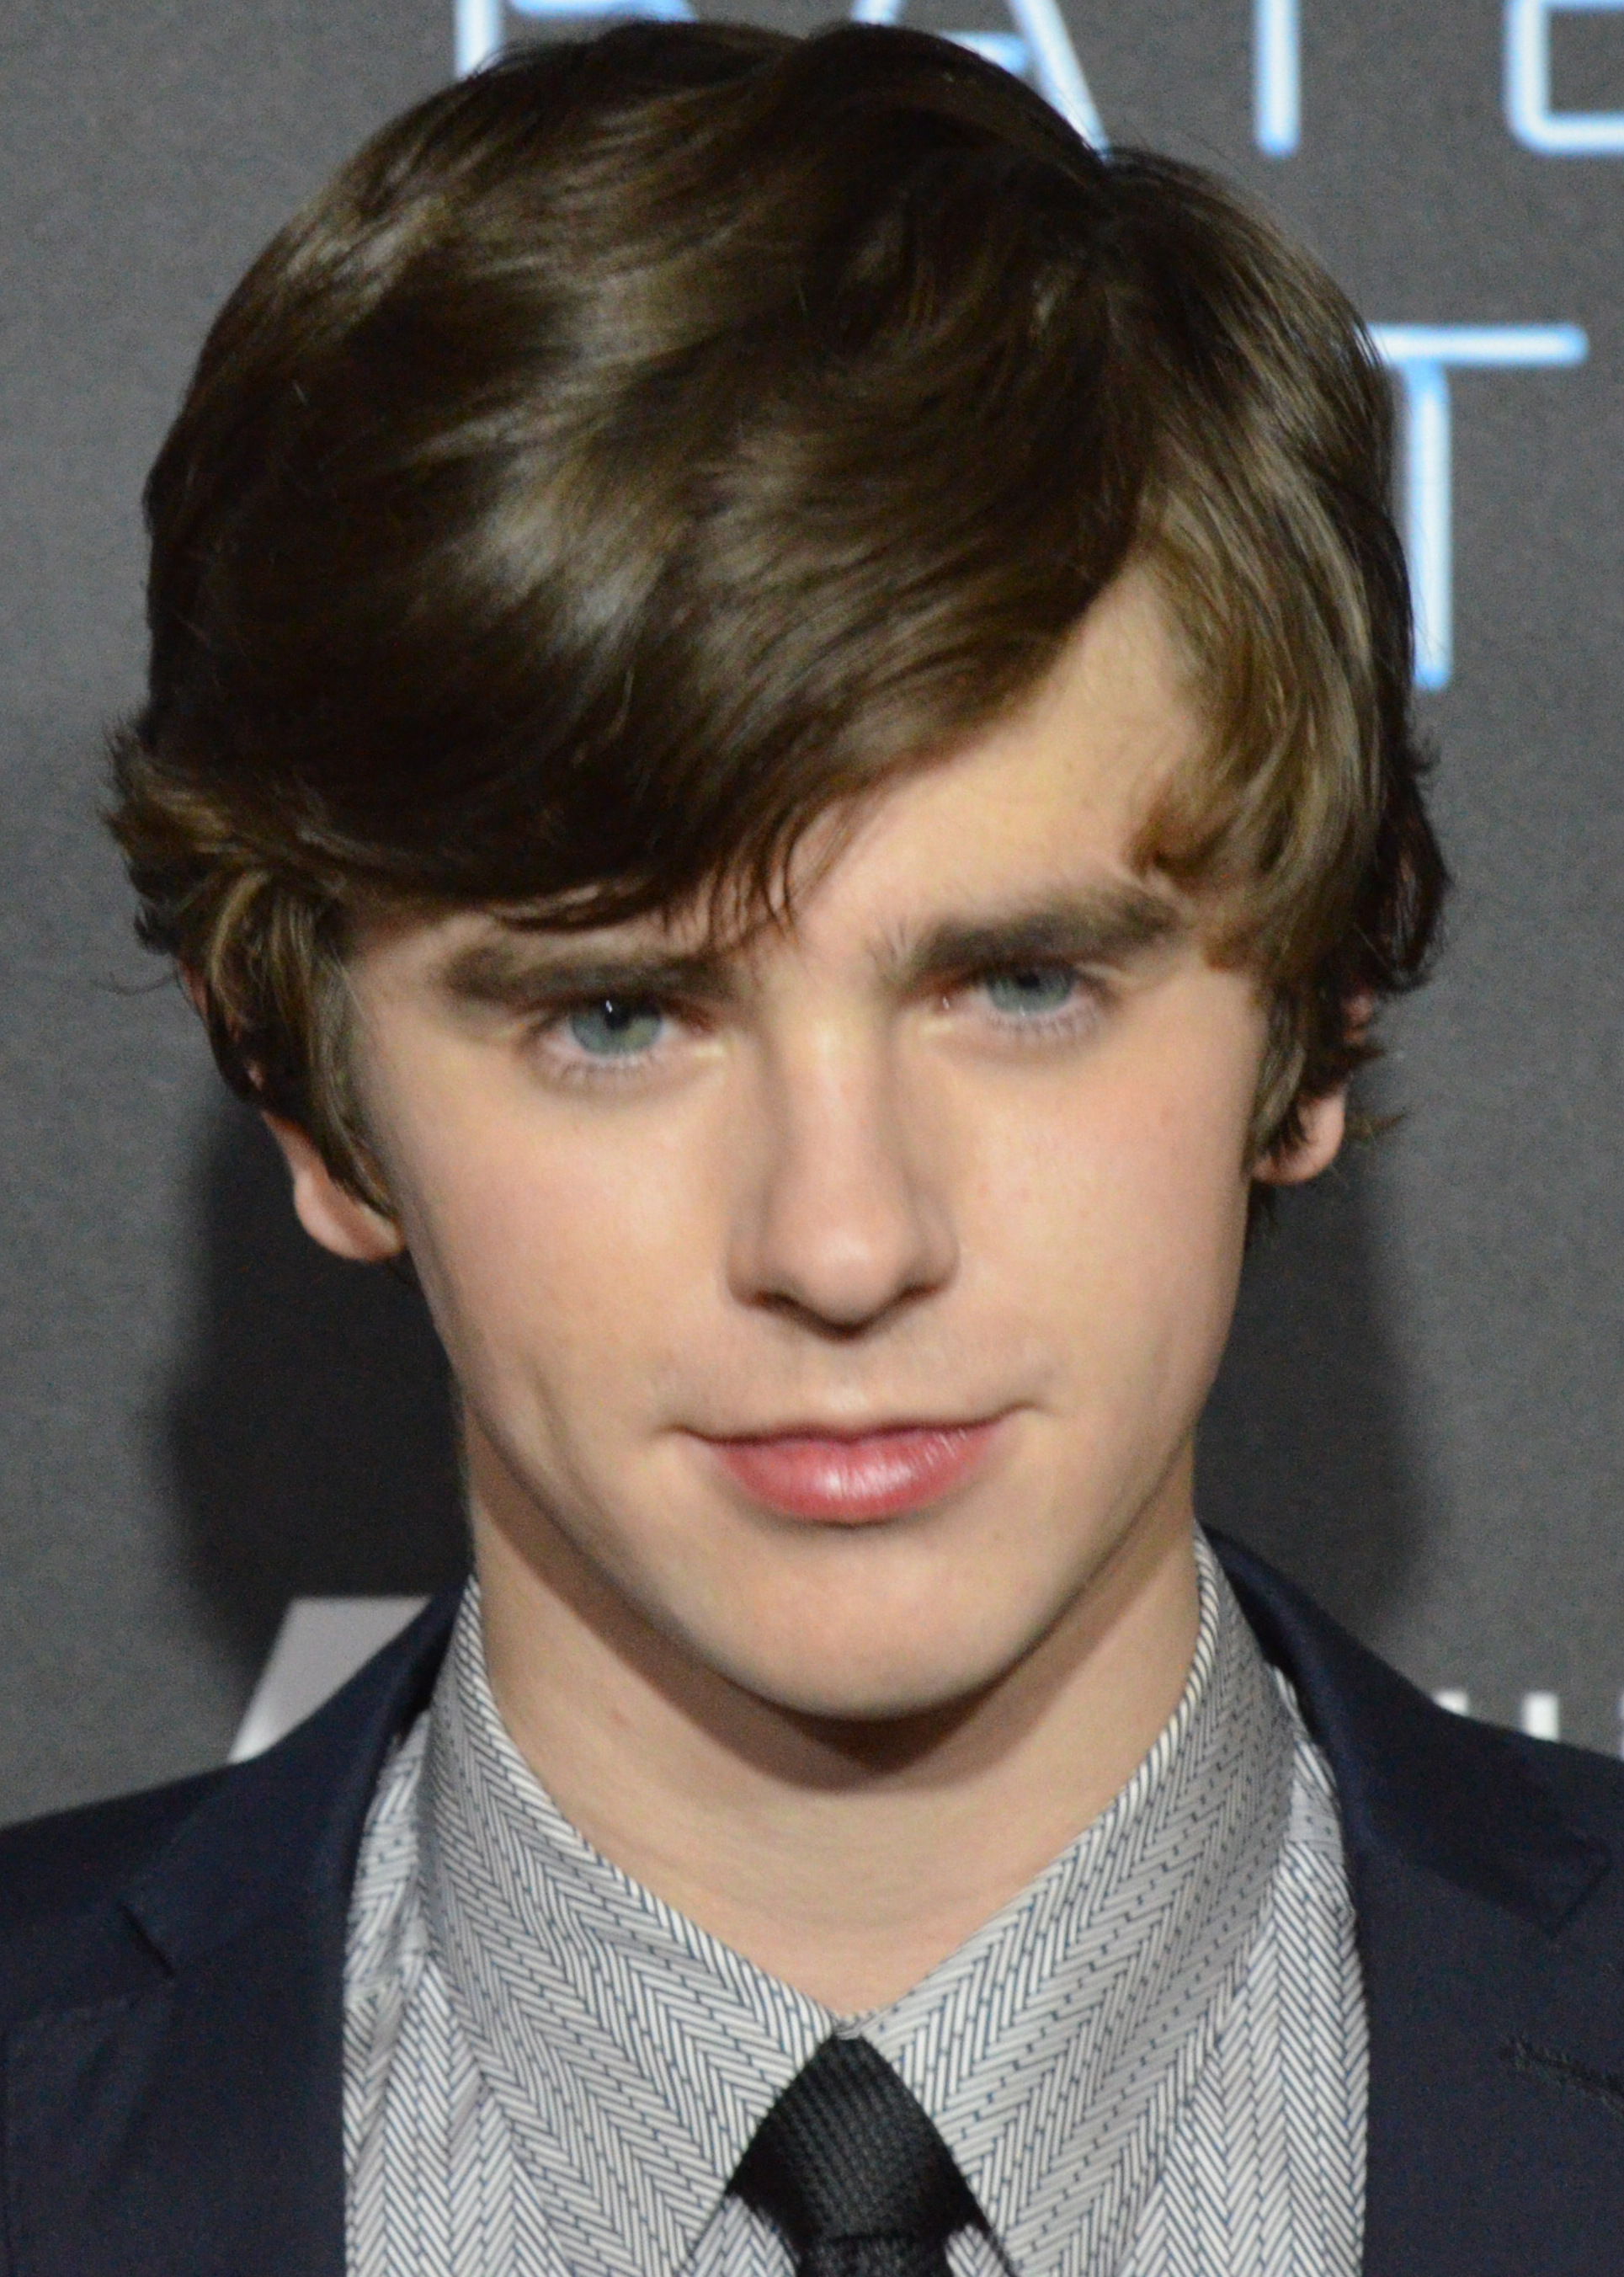 How tall is Freddie Highmore?